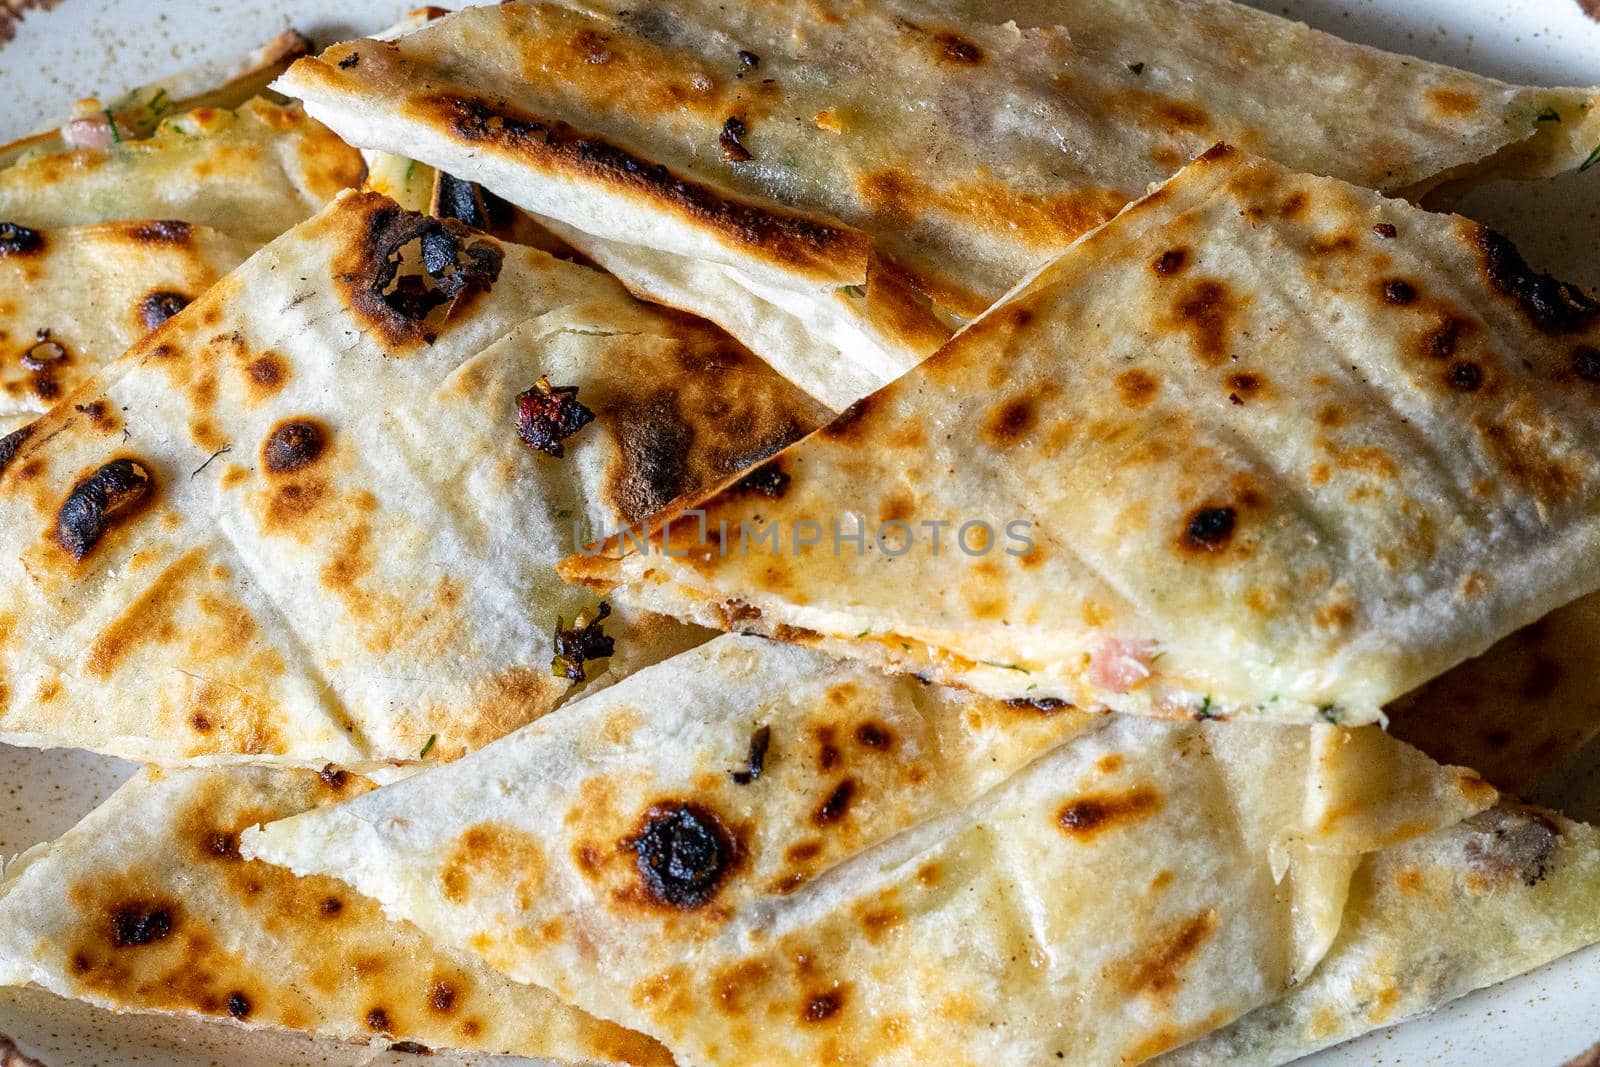 Beautifully grilled pieces of pita bread